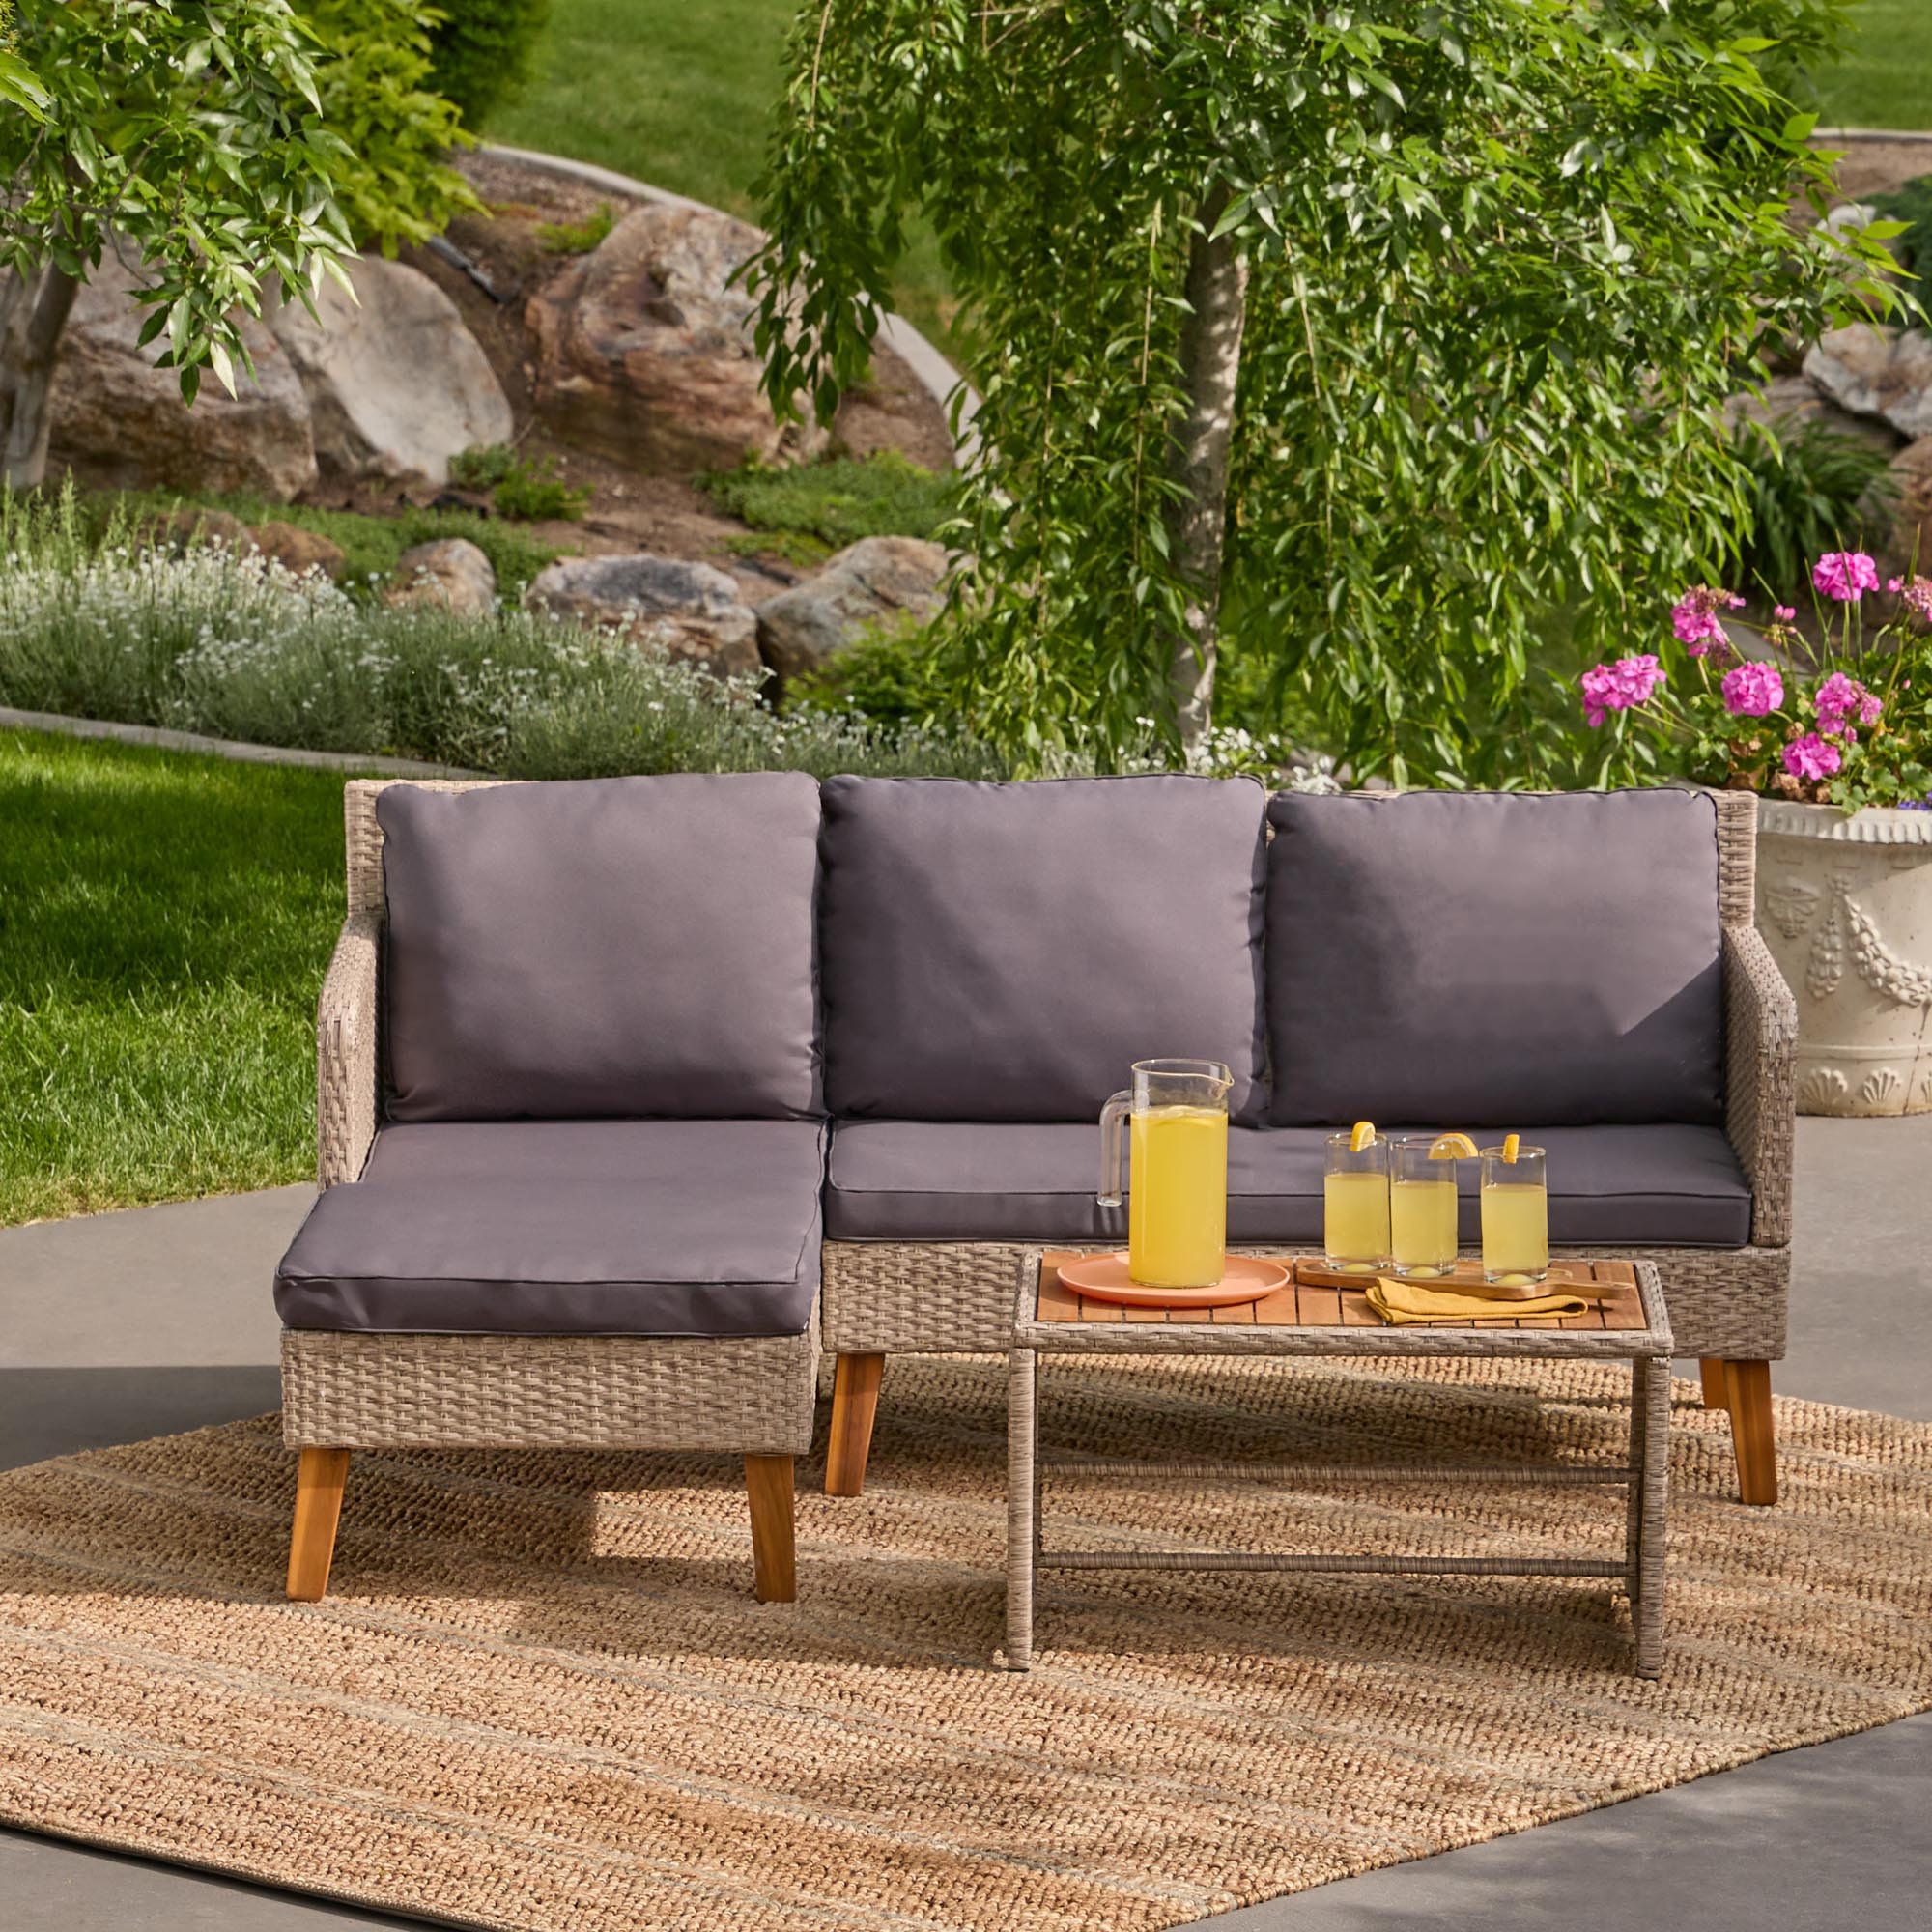 Wayfair In Most Current All Weather Wicker Sectional Seating Group (View 5 of 15)